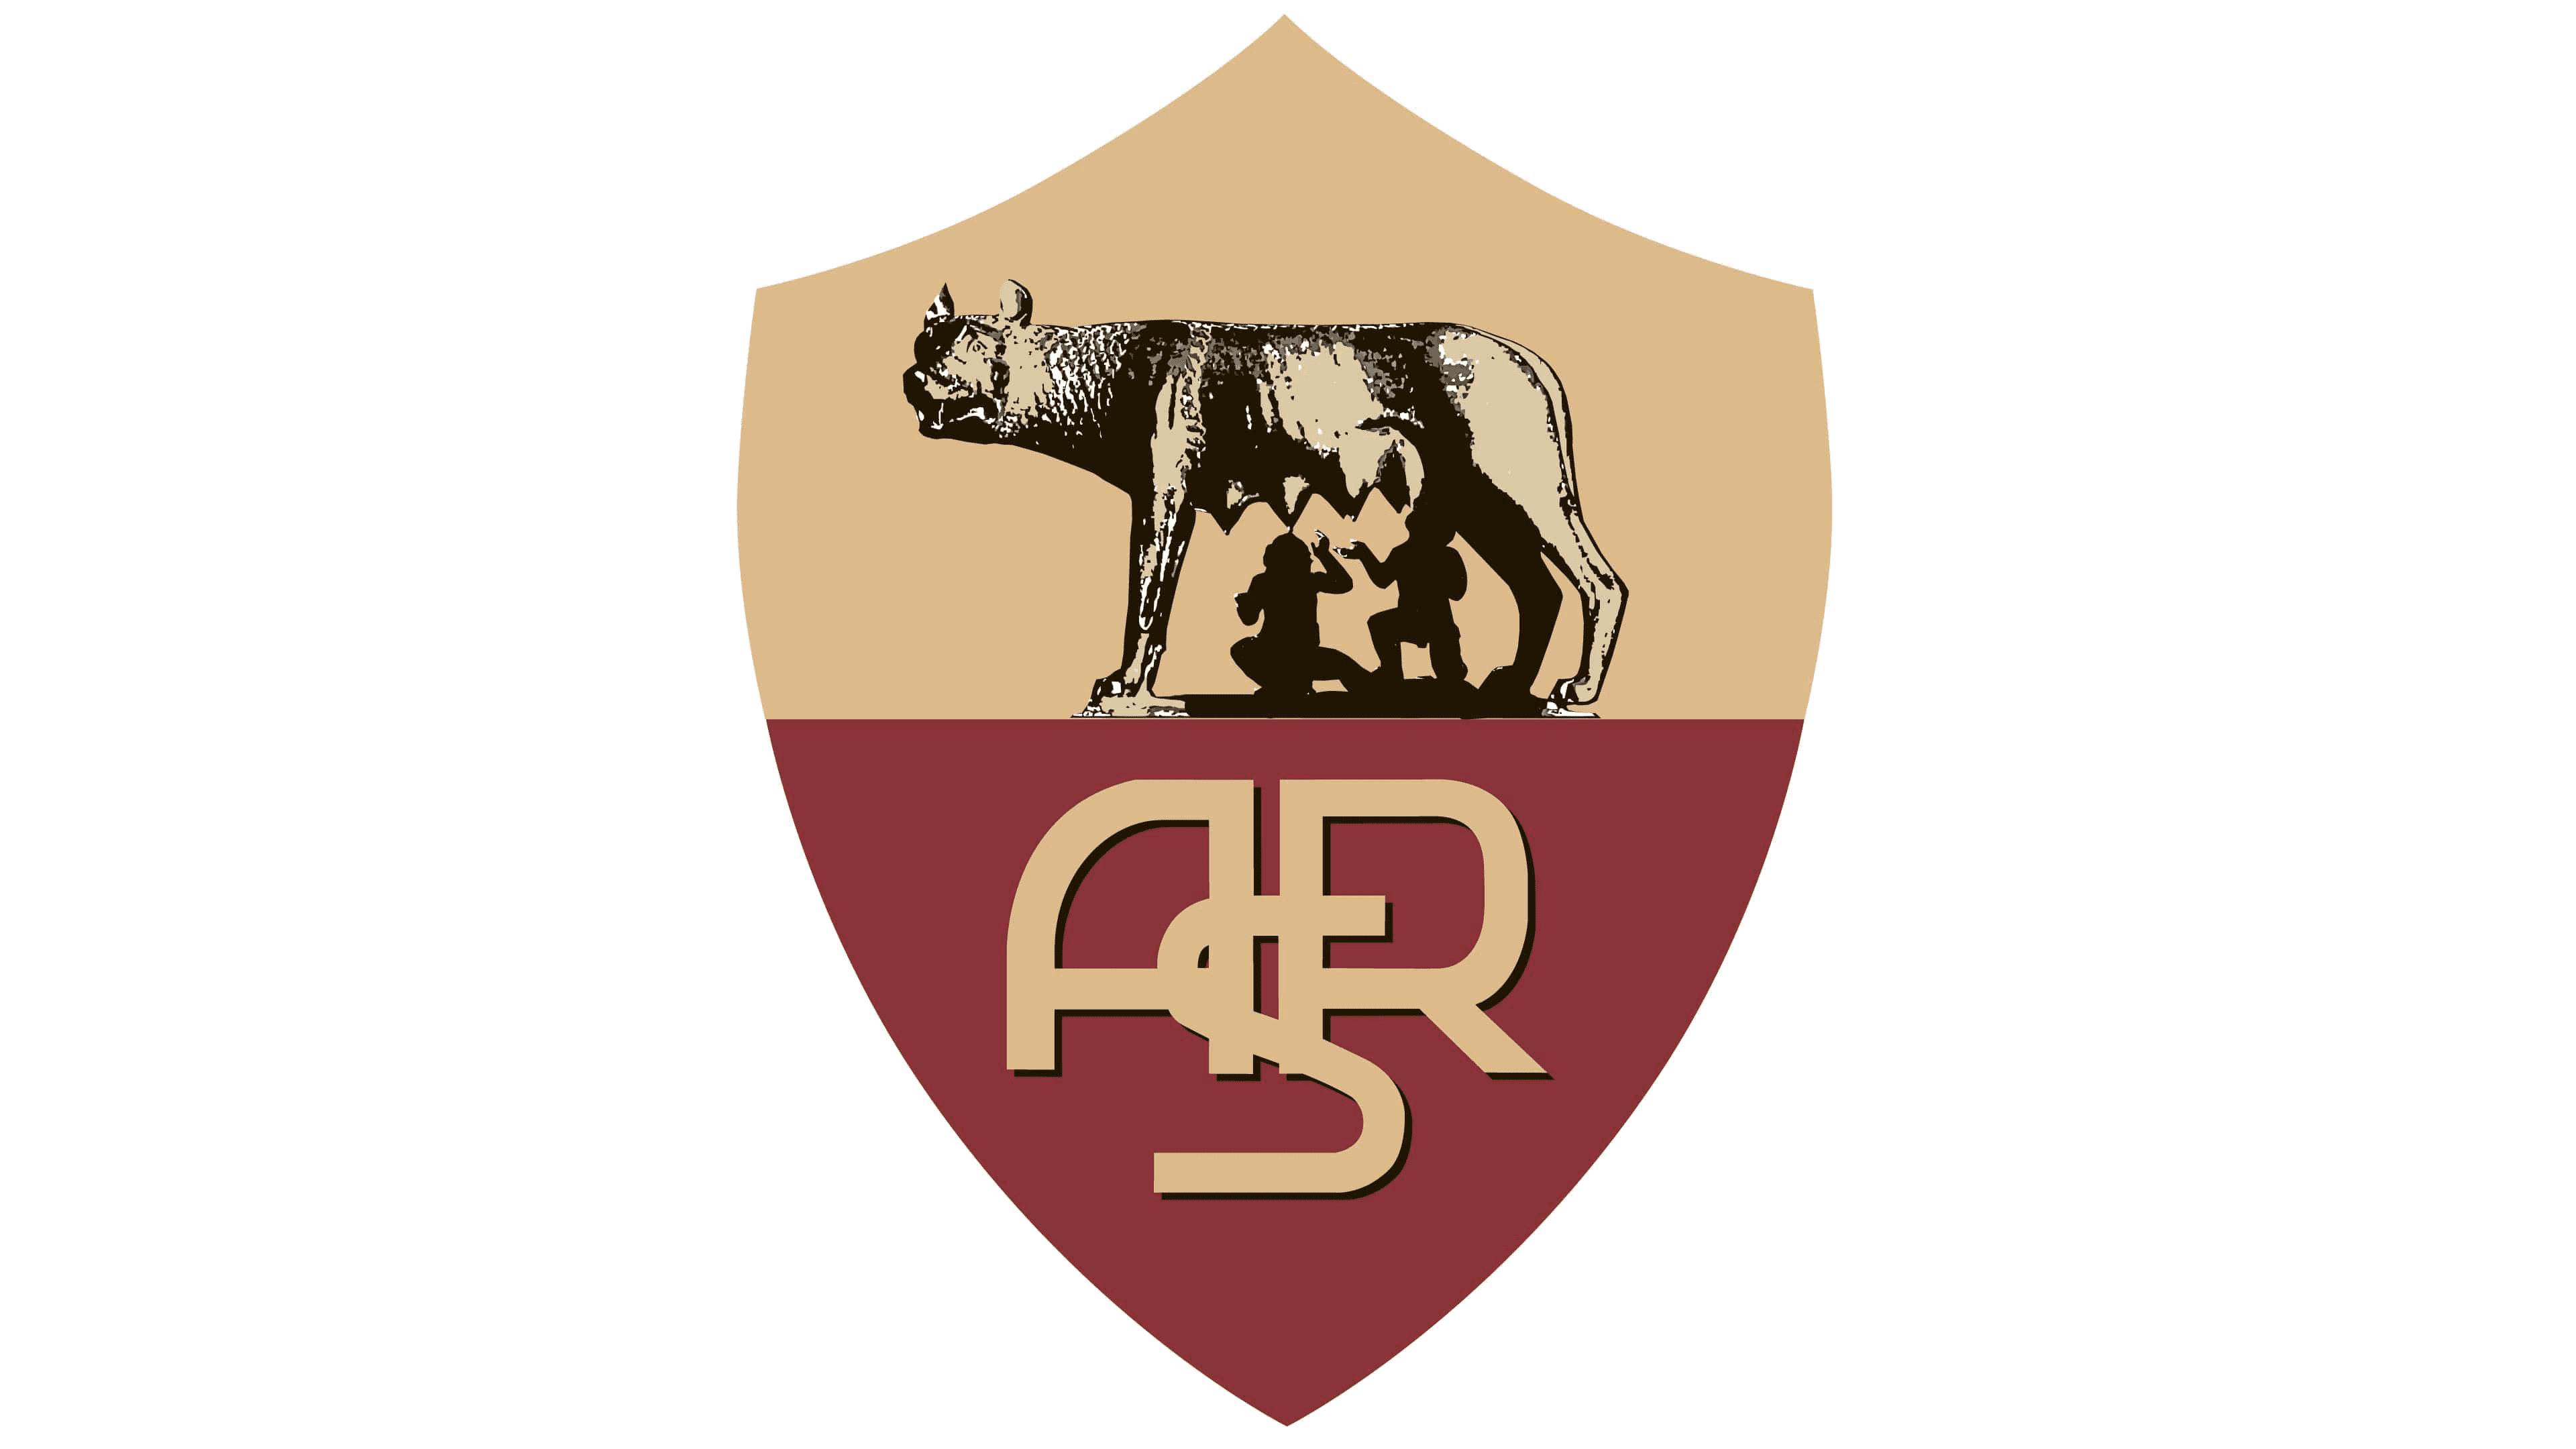 AS Roma Logo and symbol, meaning, history, sign.